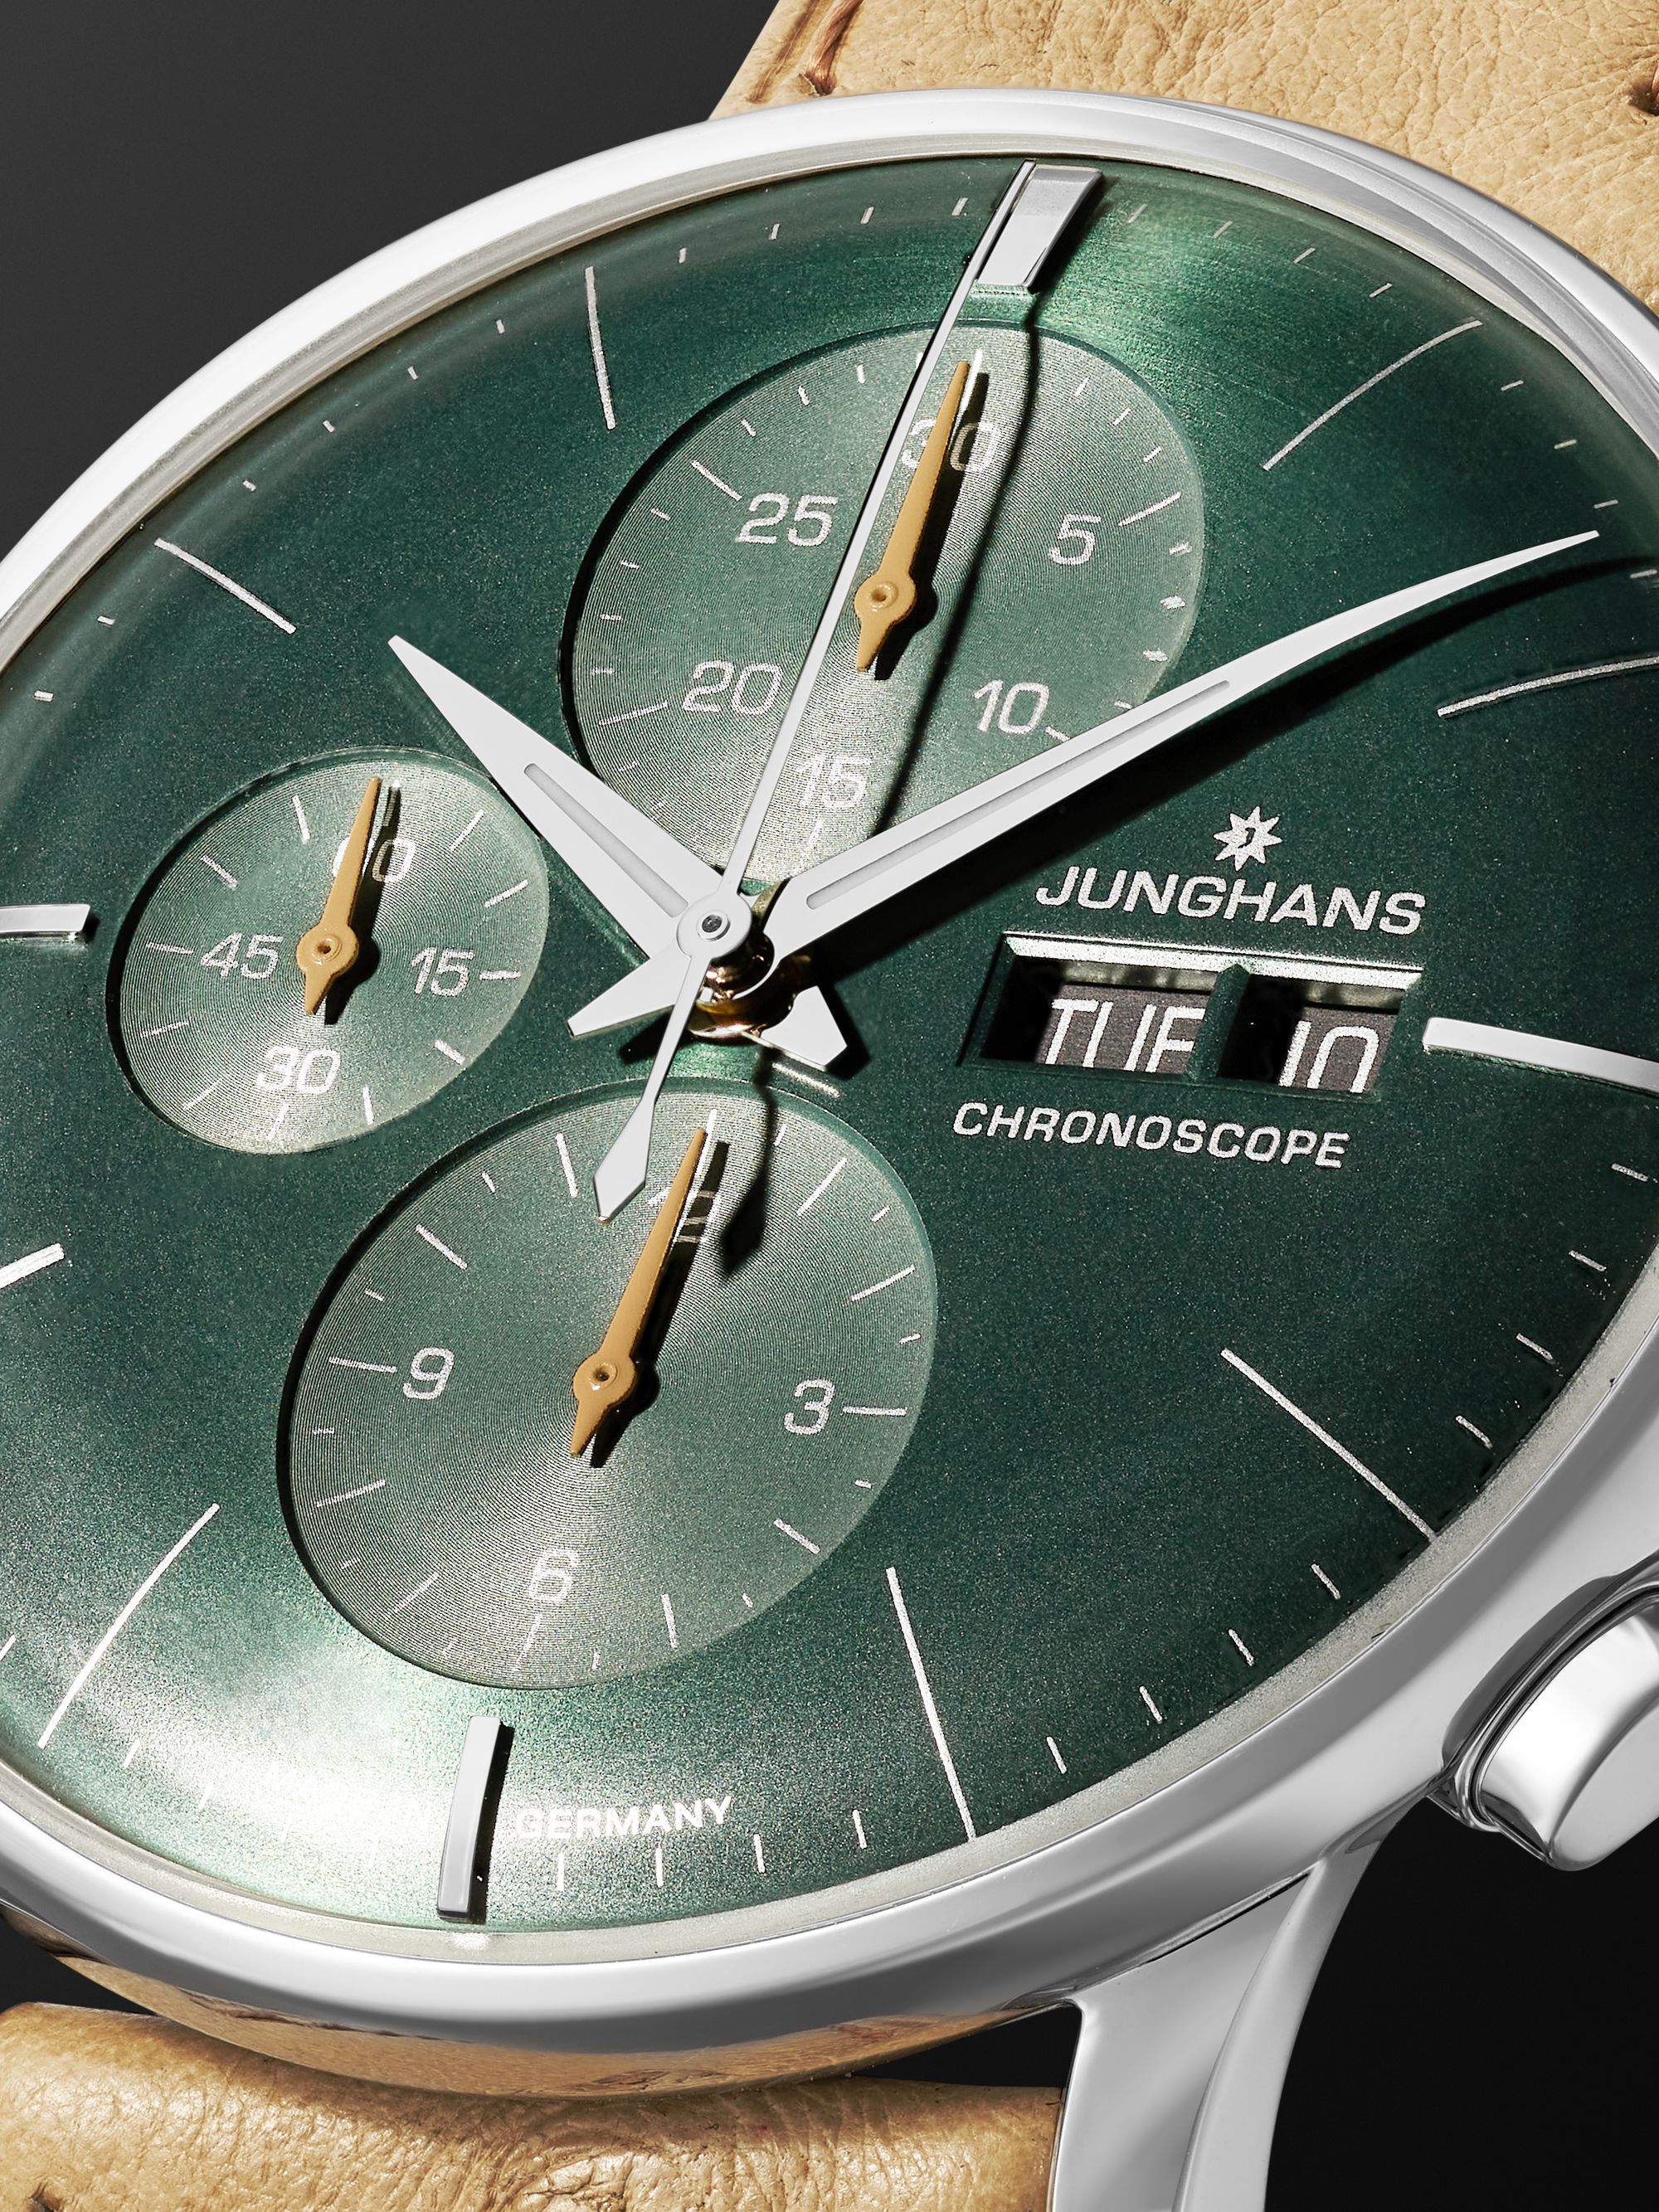 JUNGHANS Meister Chronoscope 40.7 mm Stainless Steel and Leather Watch, Ref. No 27/4222.03